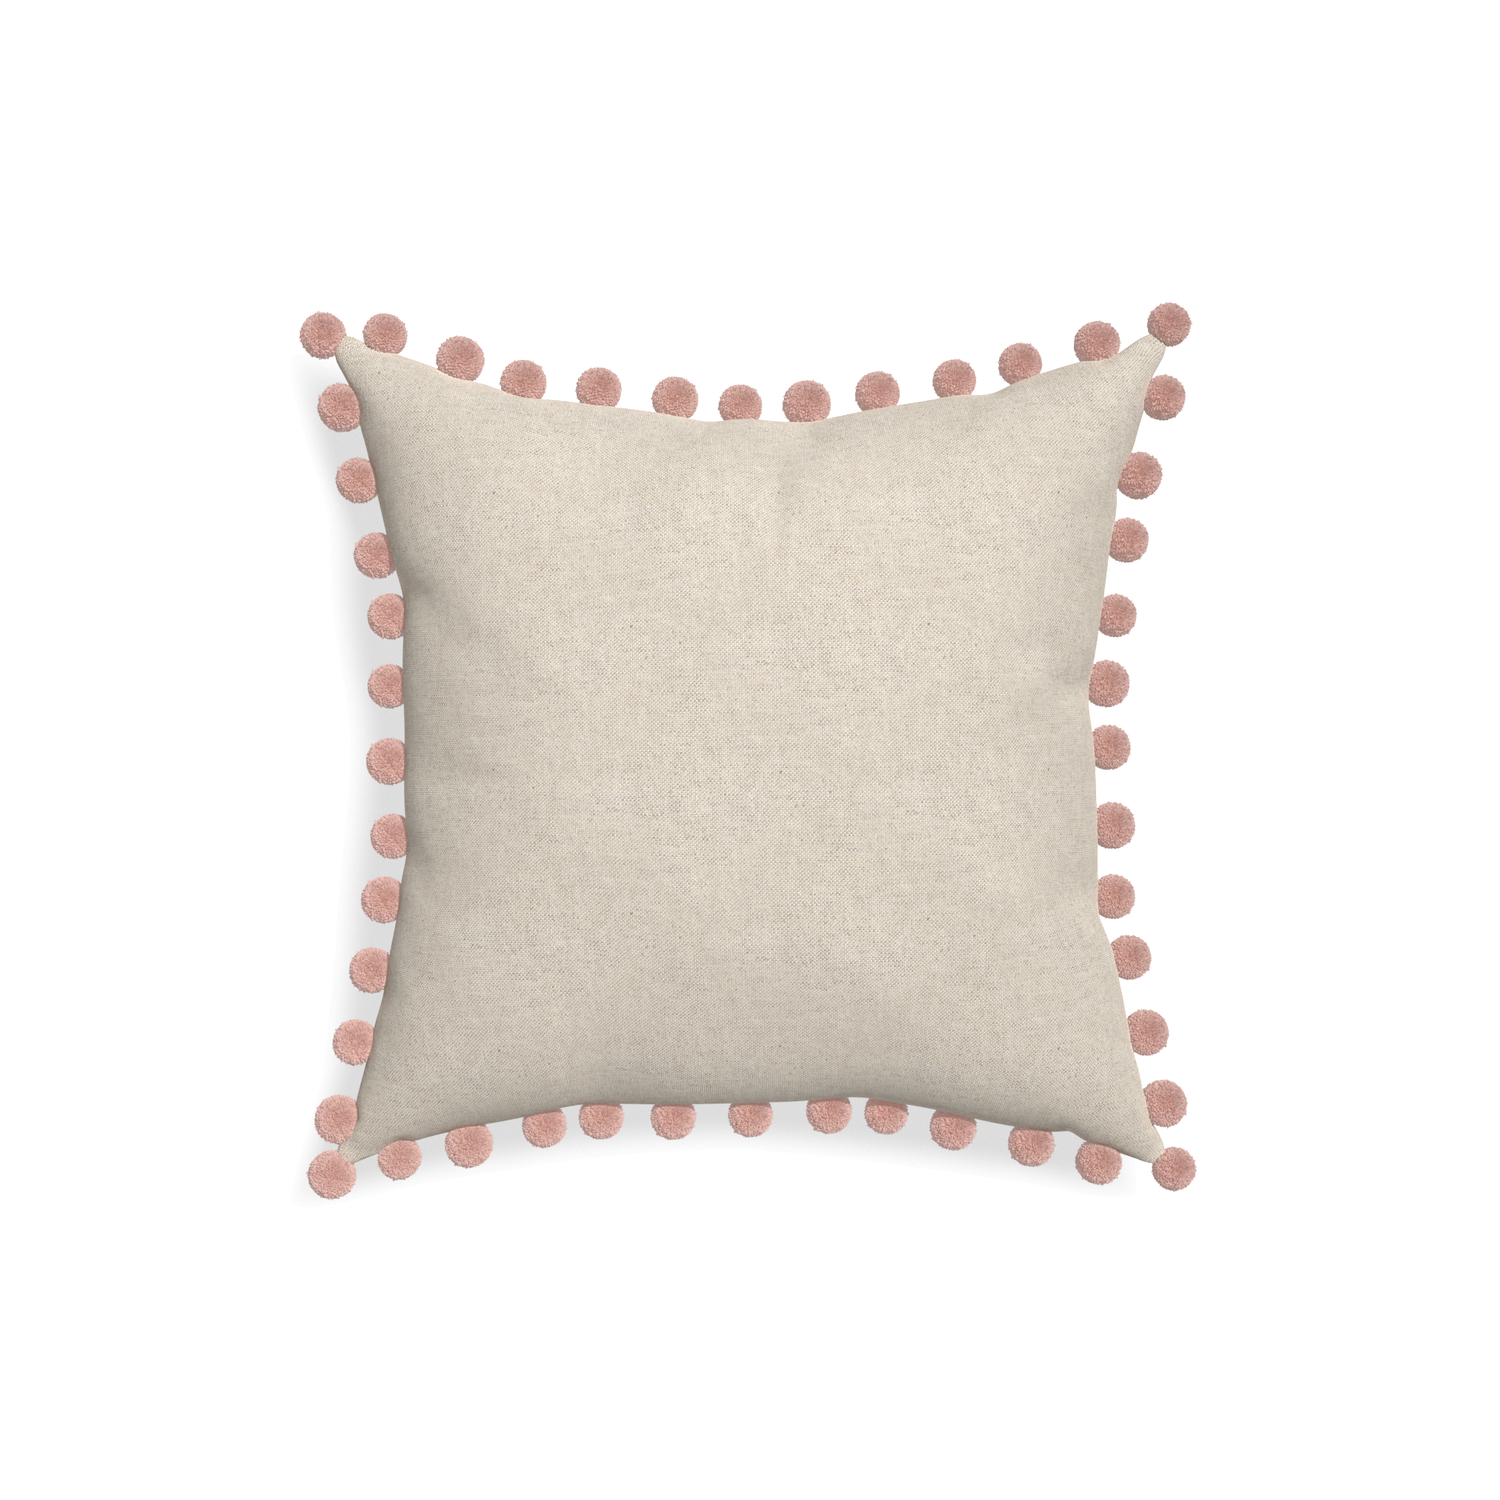 18-square oat custom light brownpillow with rose pom pom on white background